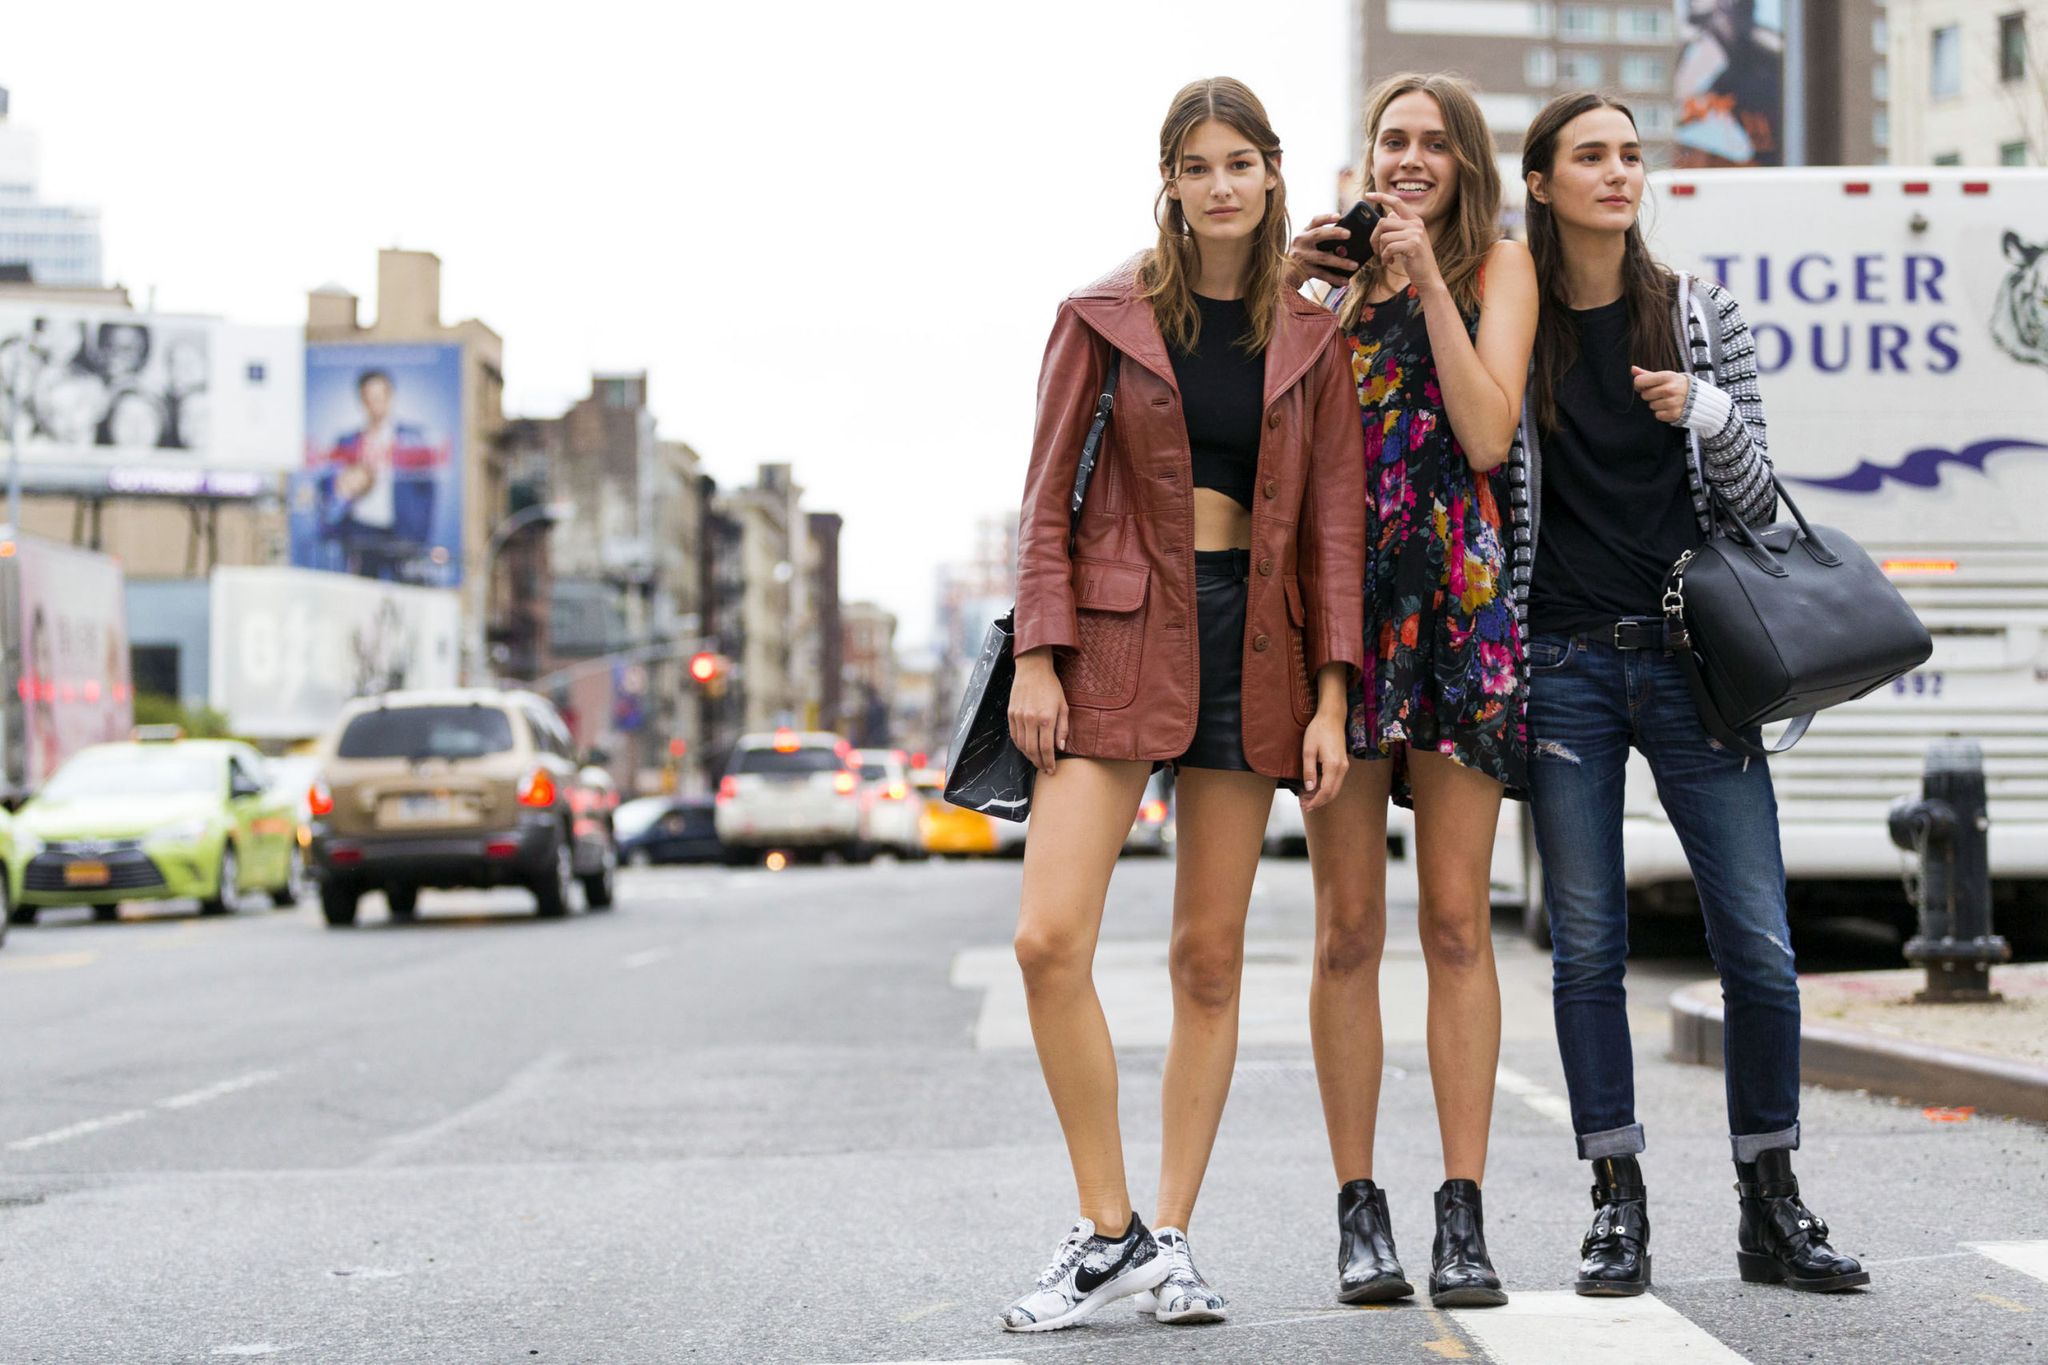 LAck of body diversity in street style fashion photography